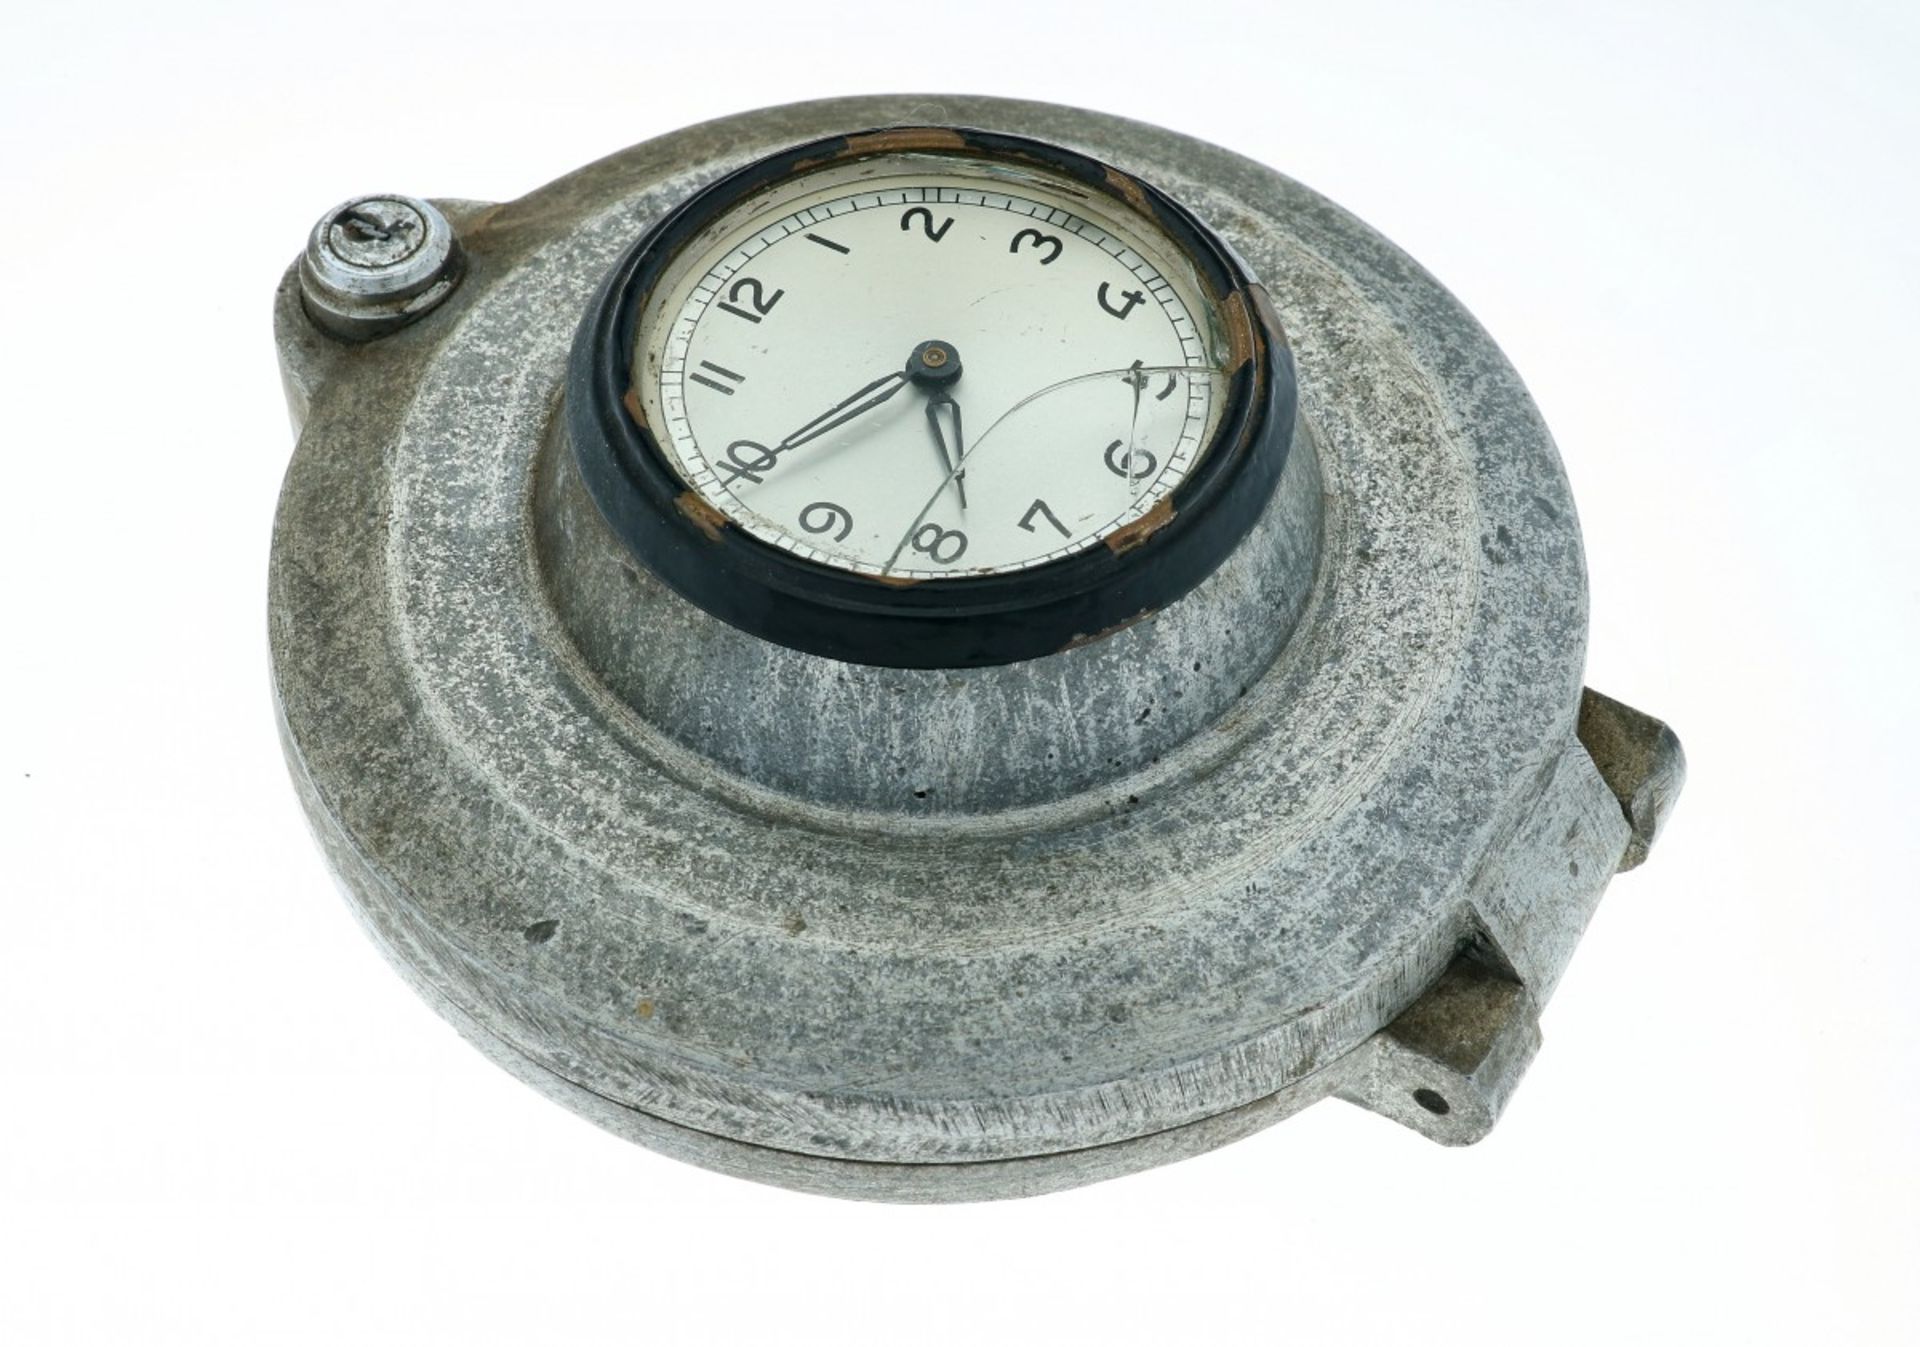 Industrial valve shaped wall clock - Image 3 of 4